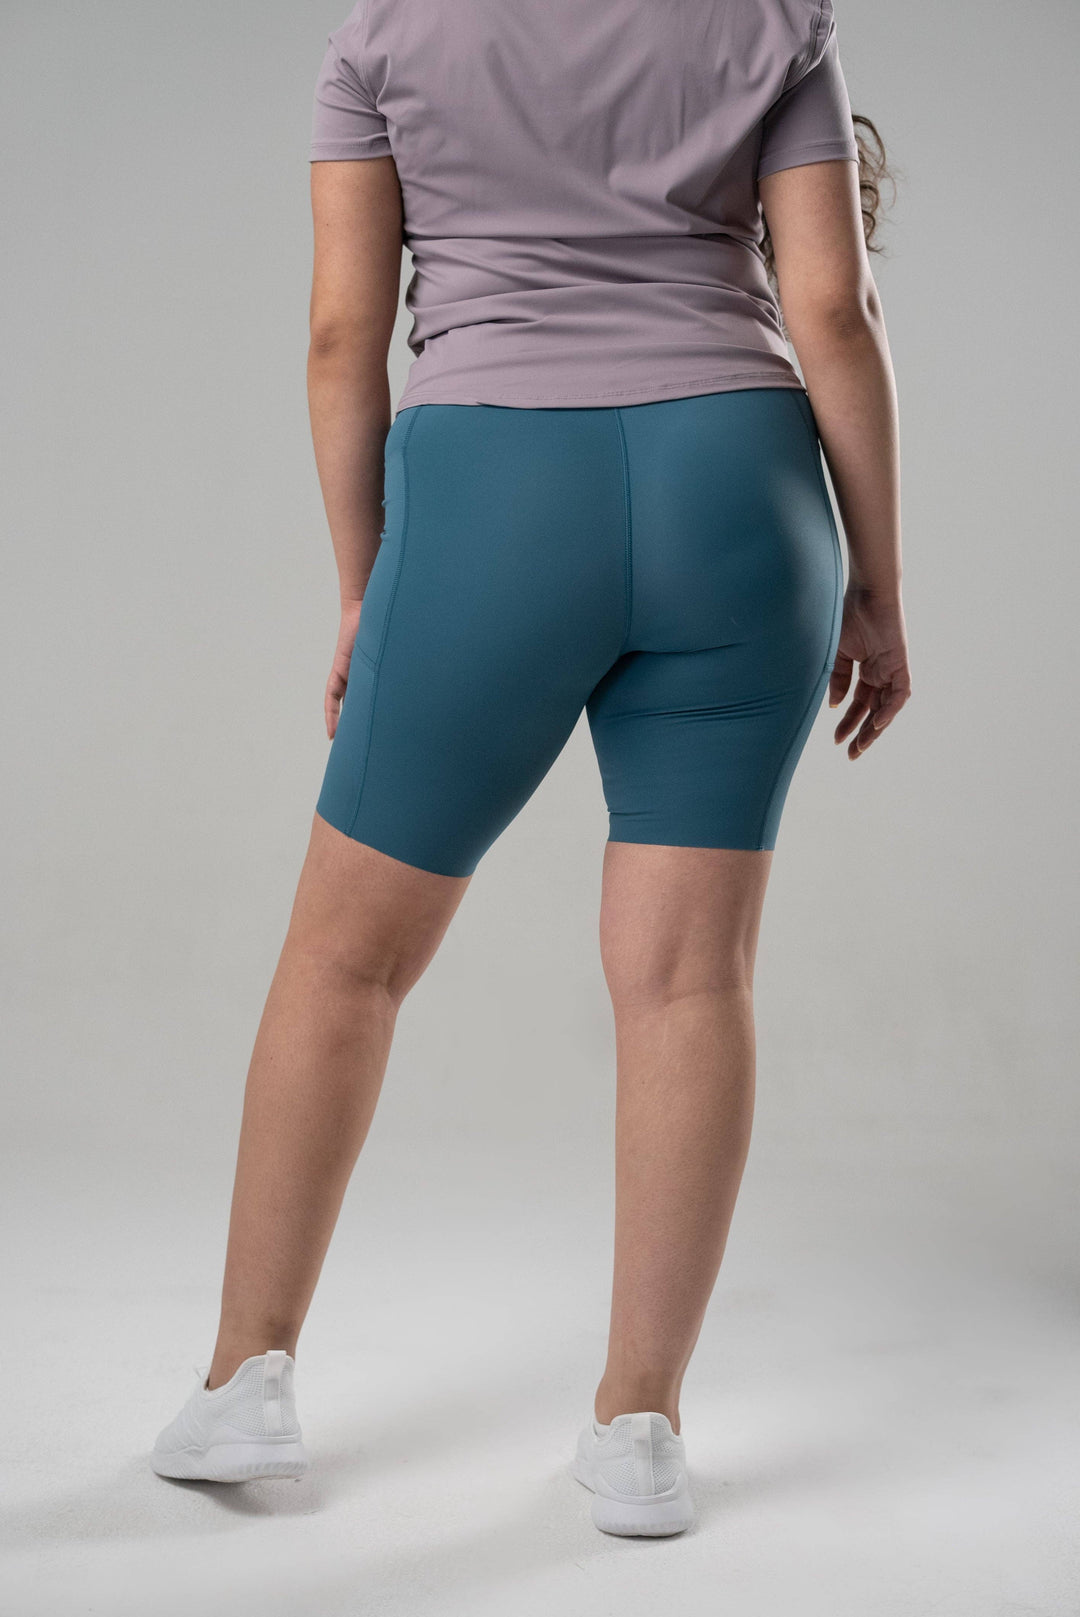 Alyth Active - Simply serene mid-rise compression shorts 8" WOMEN